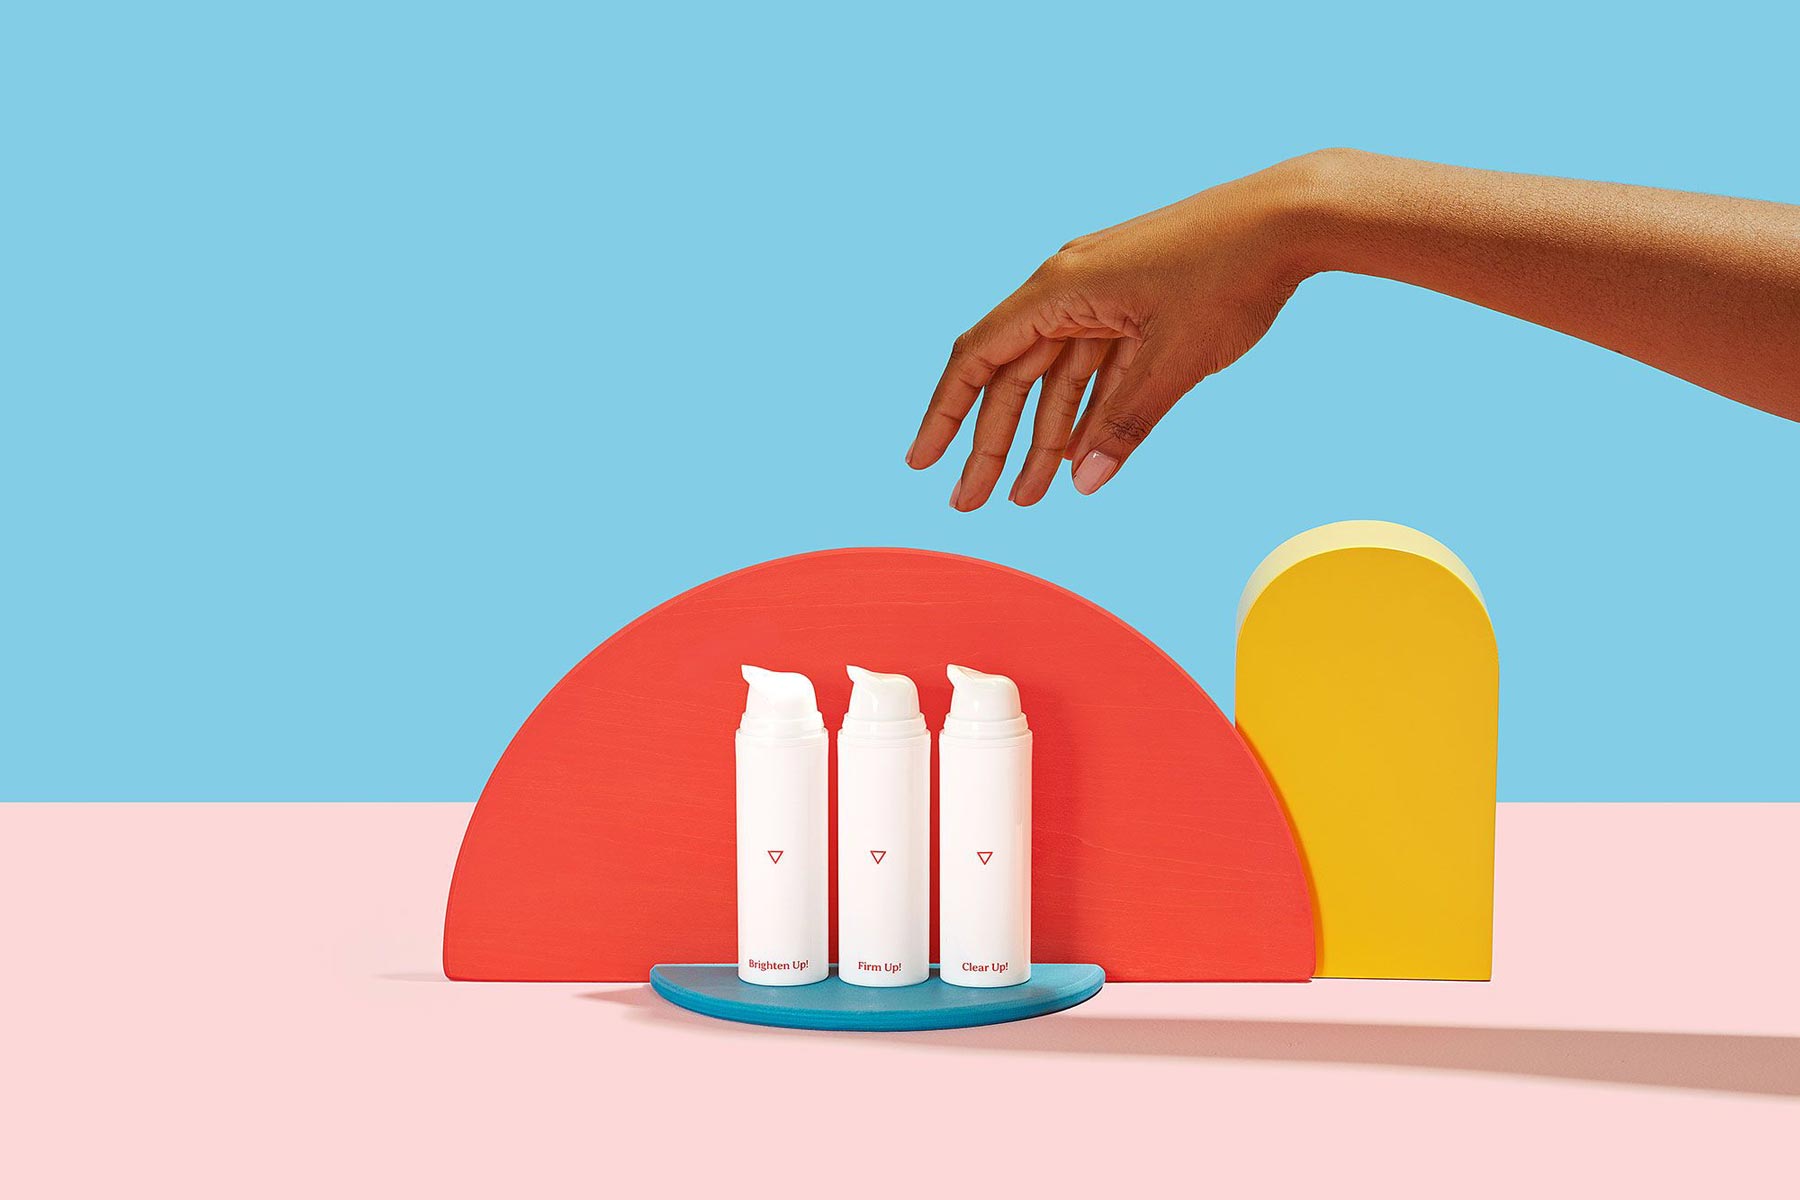 woman's hand reaching for Wisp skincare products on a colorful geometric background